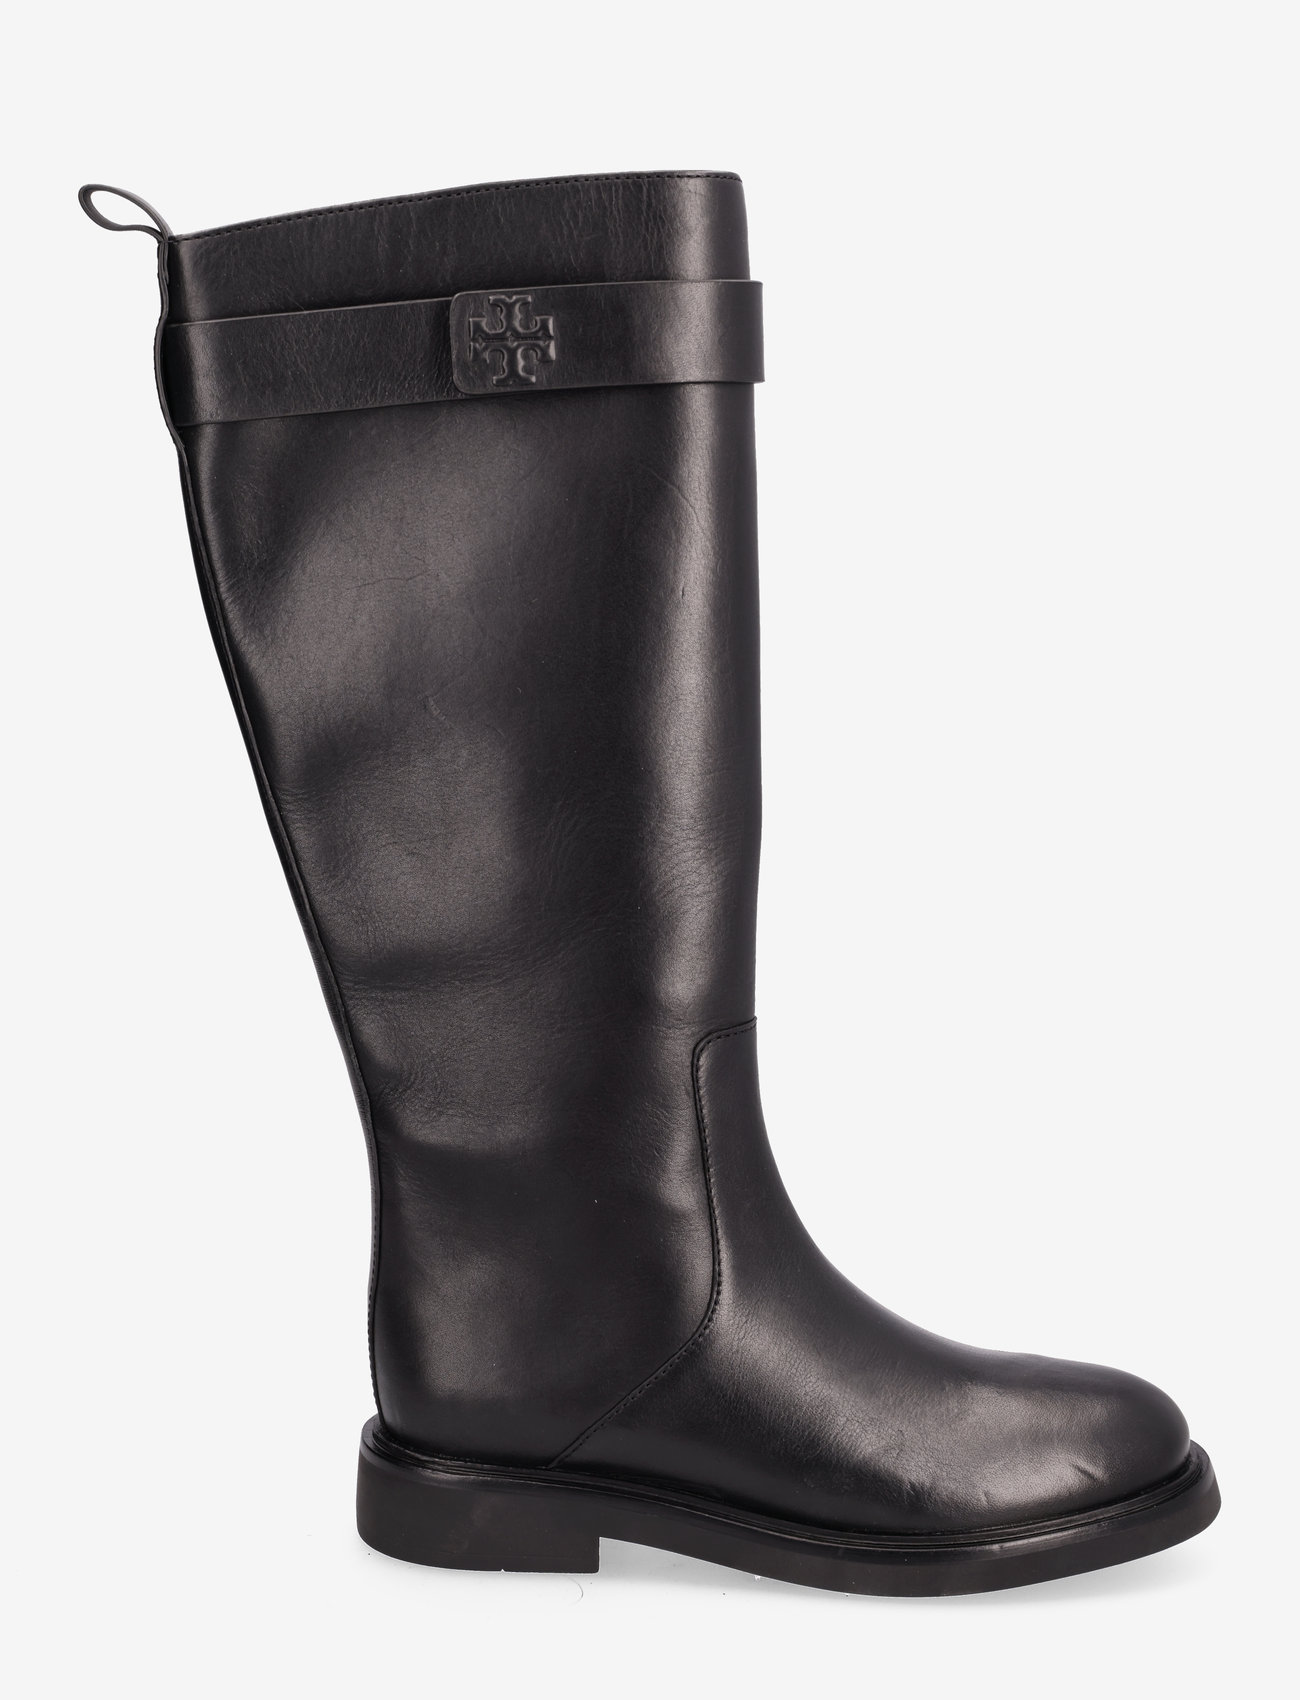 Tory Burch - DOUBLE T UTILITY BOOT 35MM - ilgaauliai - perfect black - 1